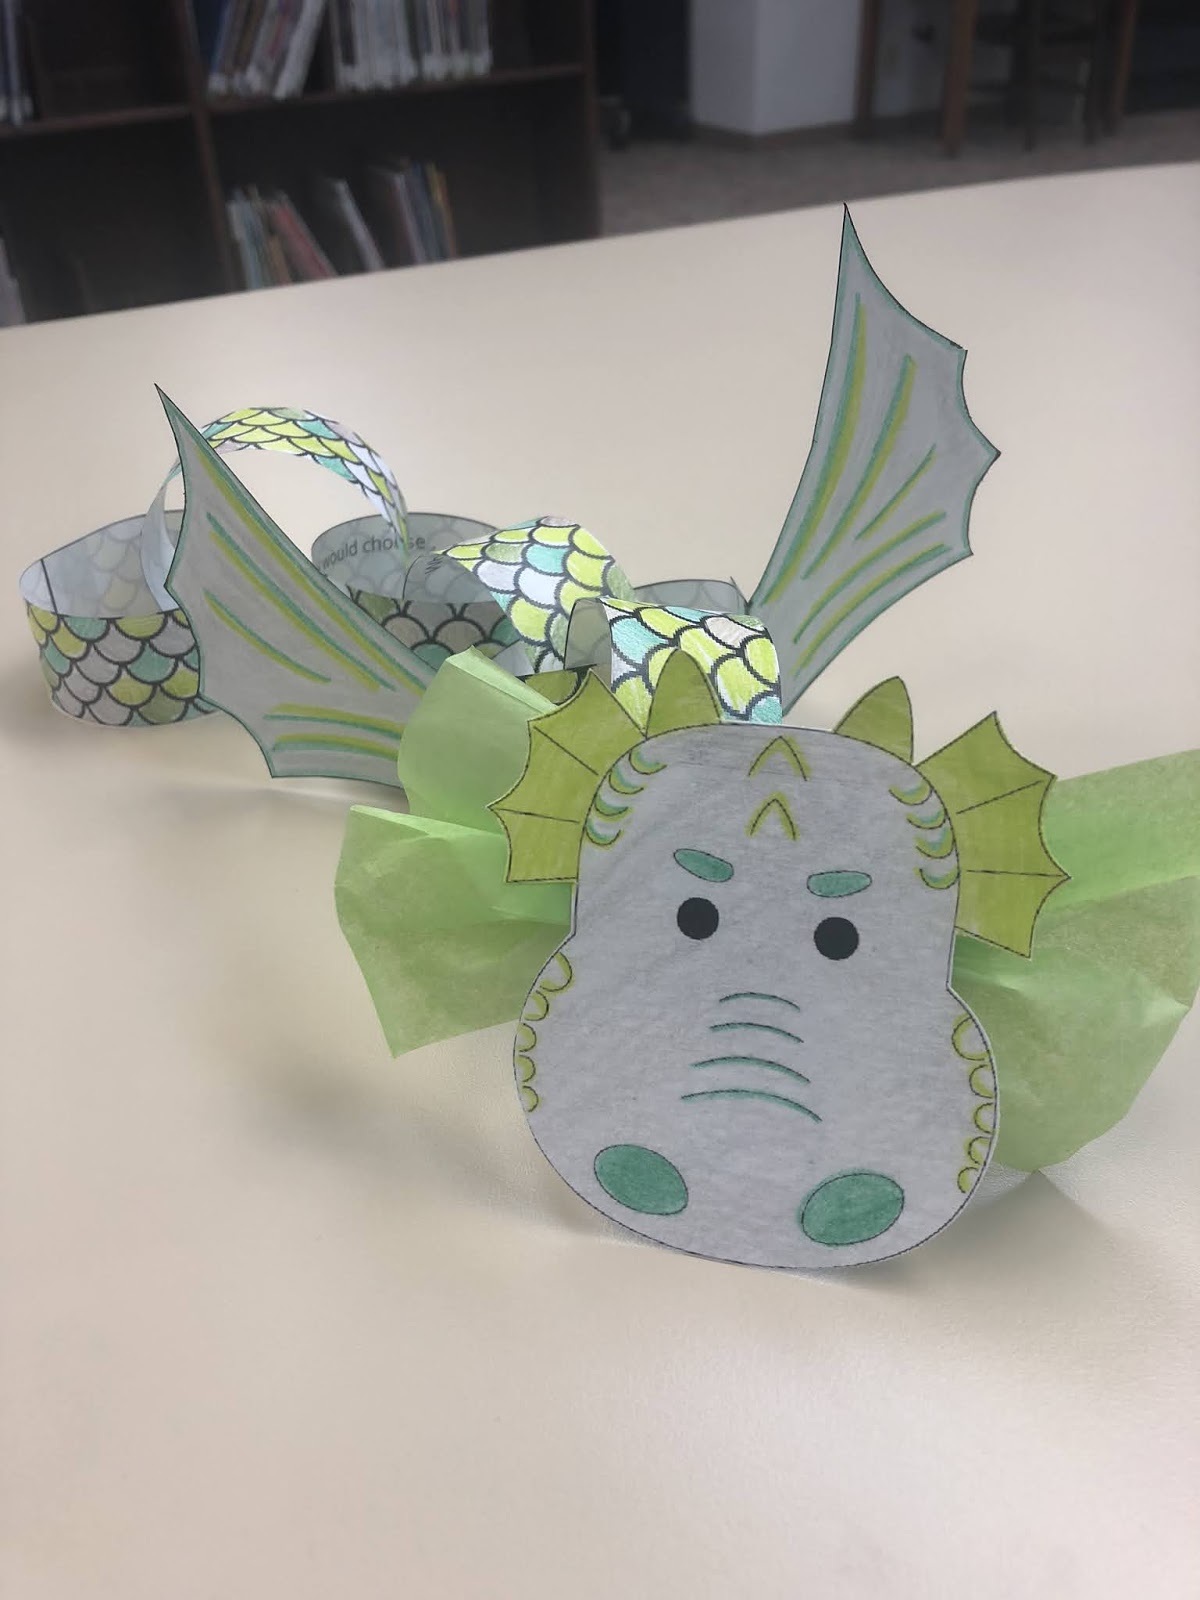 Knights and Dragons Kid Activities - The Learning Curve